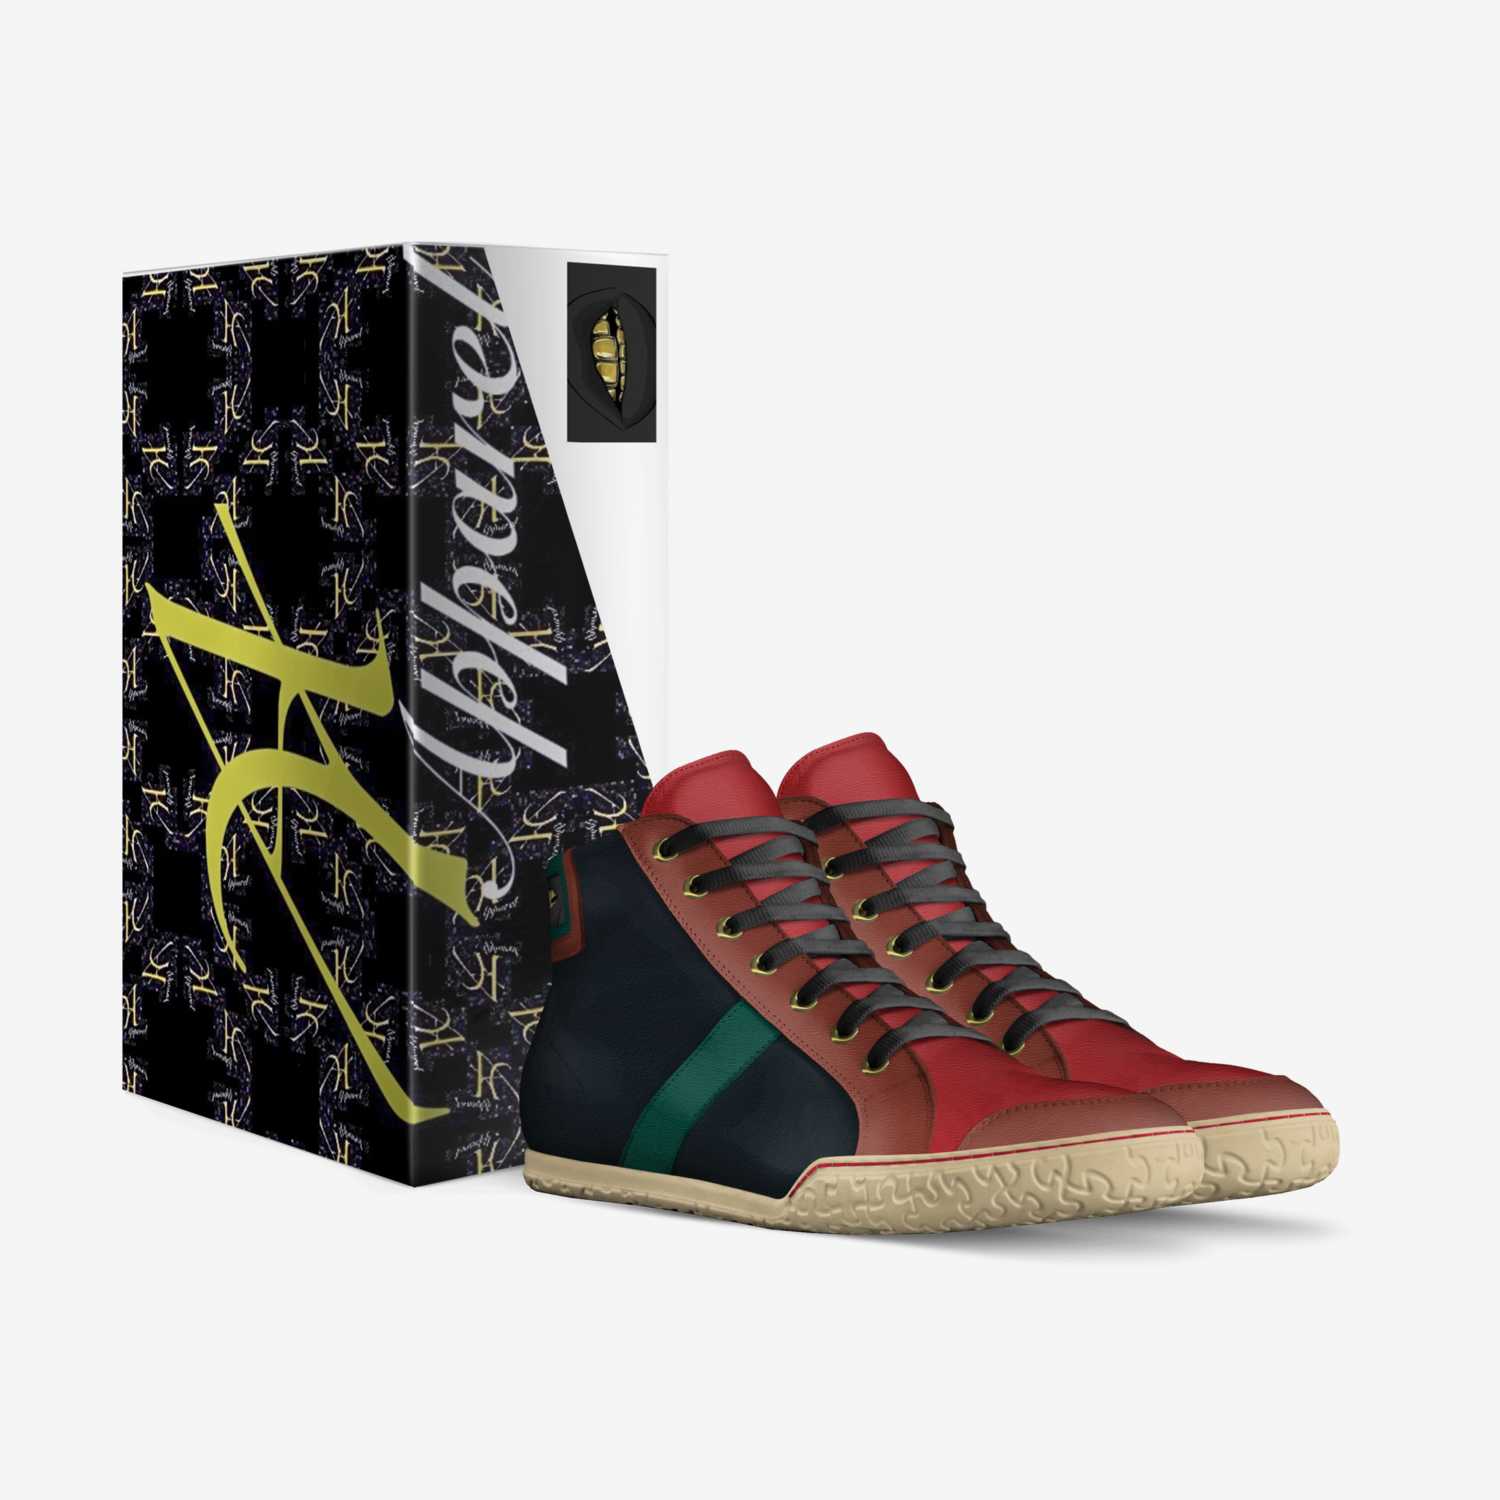 AY Apparel custom made in Italy shoes by Alton Young | Box view